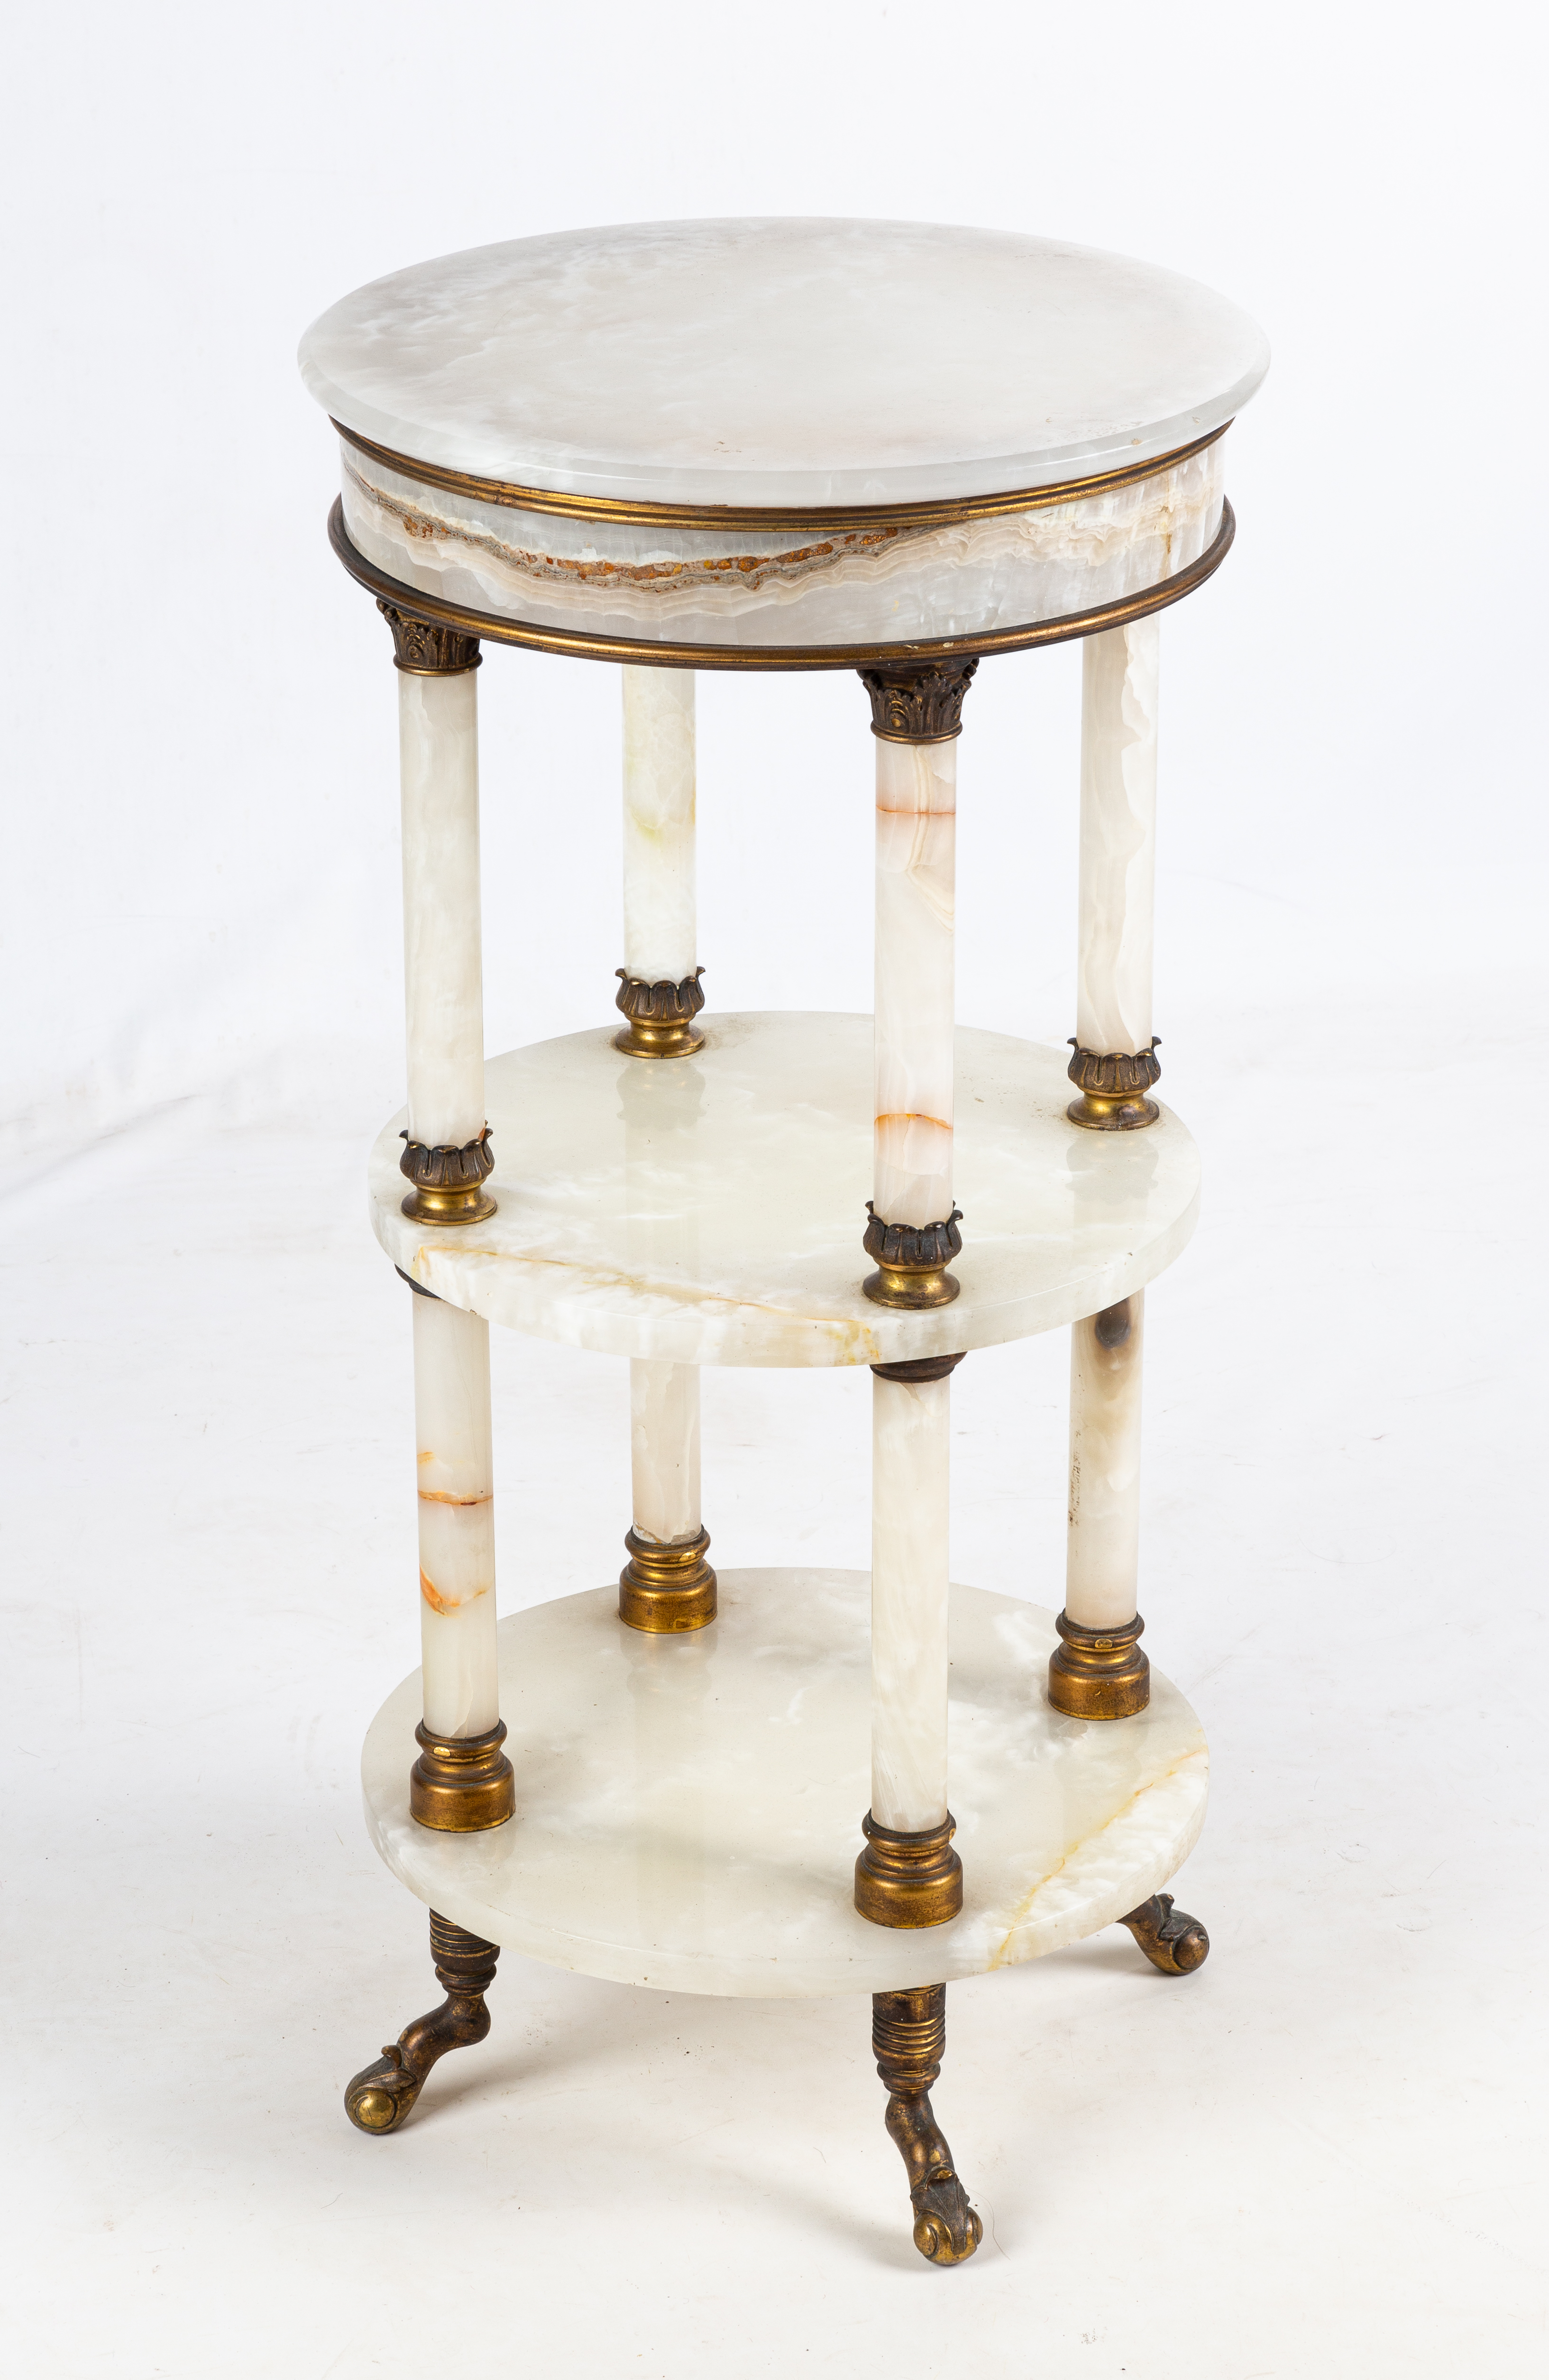 FRENCH ONYX SIDE TABLE PEDESTAL 2faf66d